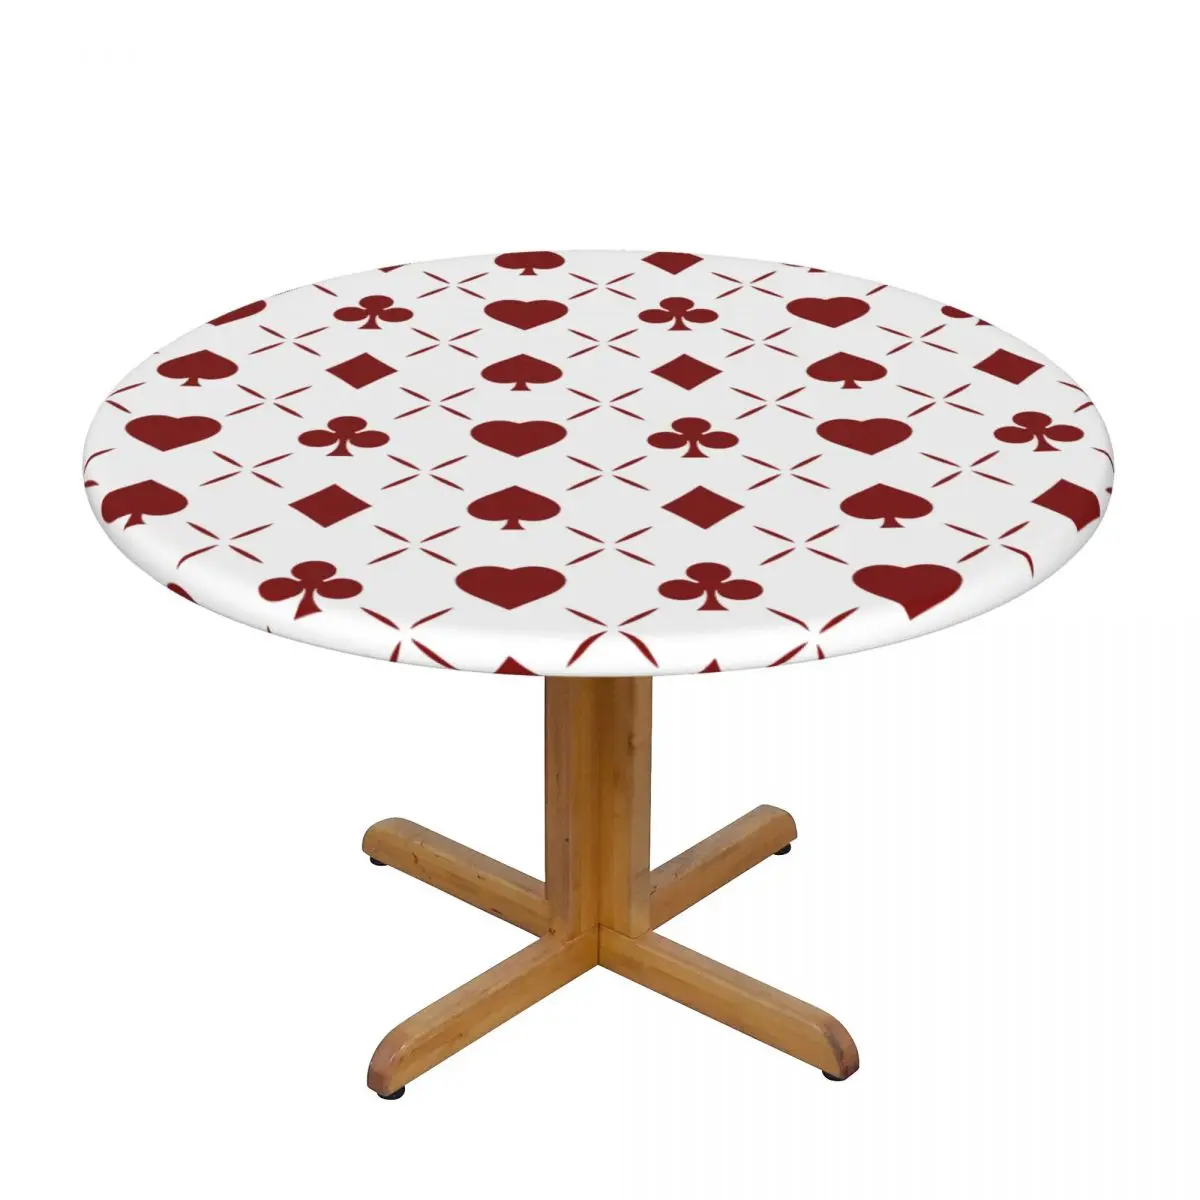 

Waterproof Tablecloths Round Elastic Tablecloth Red Poker Hearts Clubs Spades And Diamonds Table Cloth Cover Coffee Table Pad